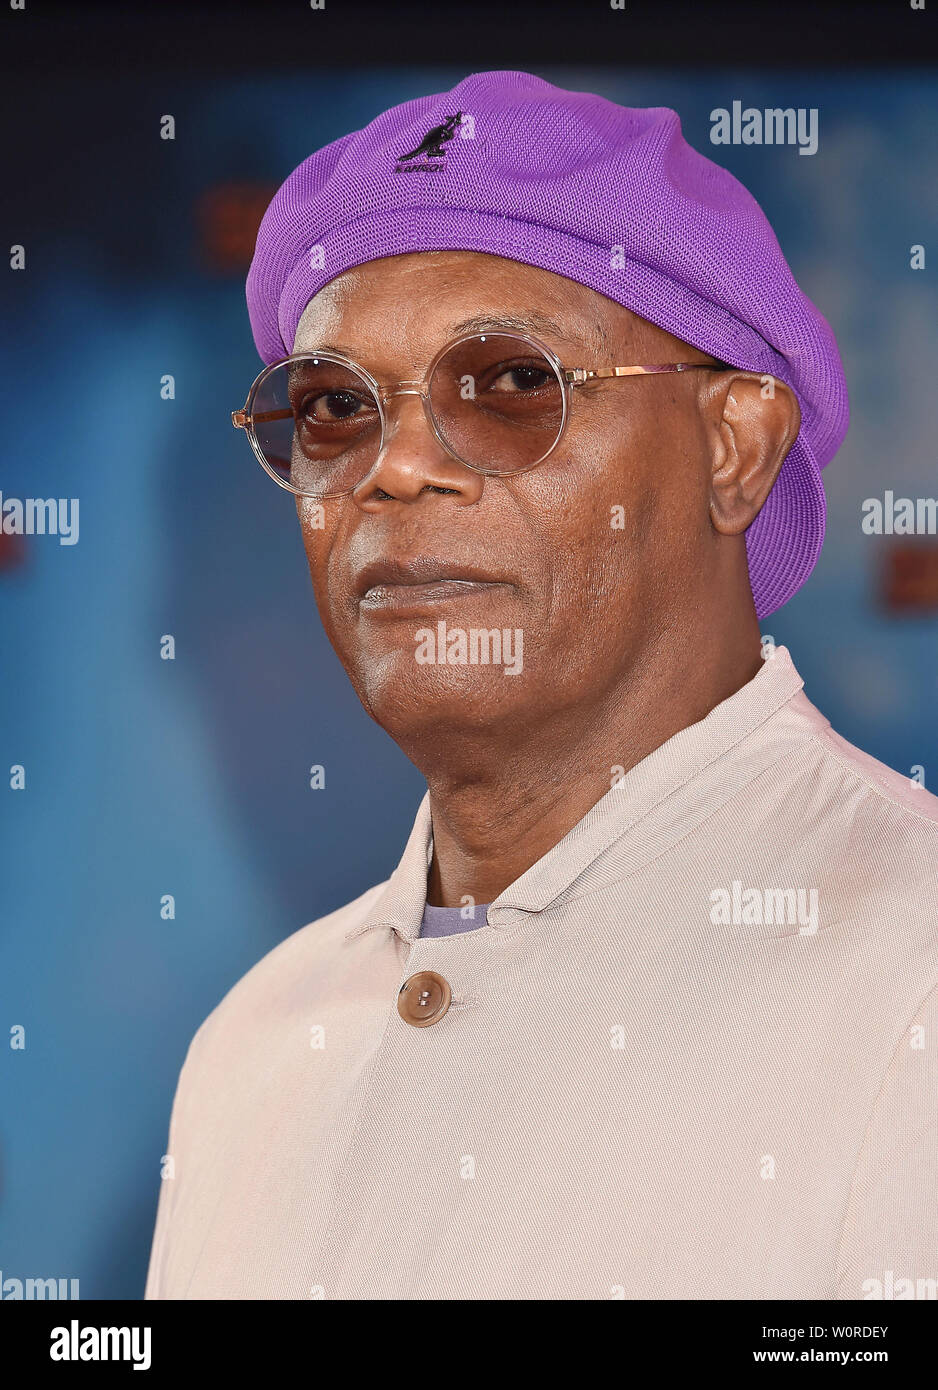 HOLLYWOOD, CA - JUNE 26: Samuel L. Jackson attends the premiere of Sony Pictures' 'Spider-Man Far From Home' at TCL Chinese Theatre on June 26, 2019 in Hollywood, California. Stock Photo